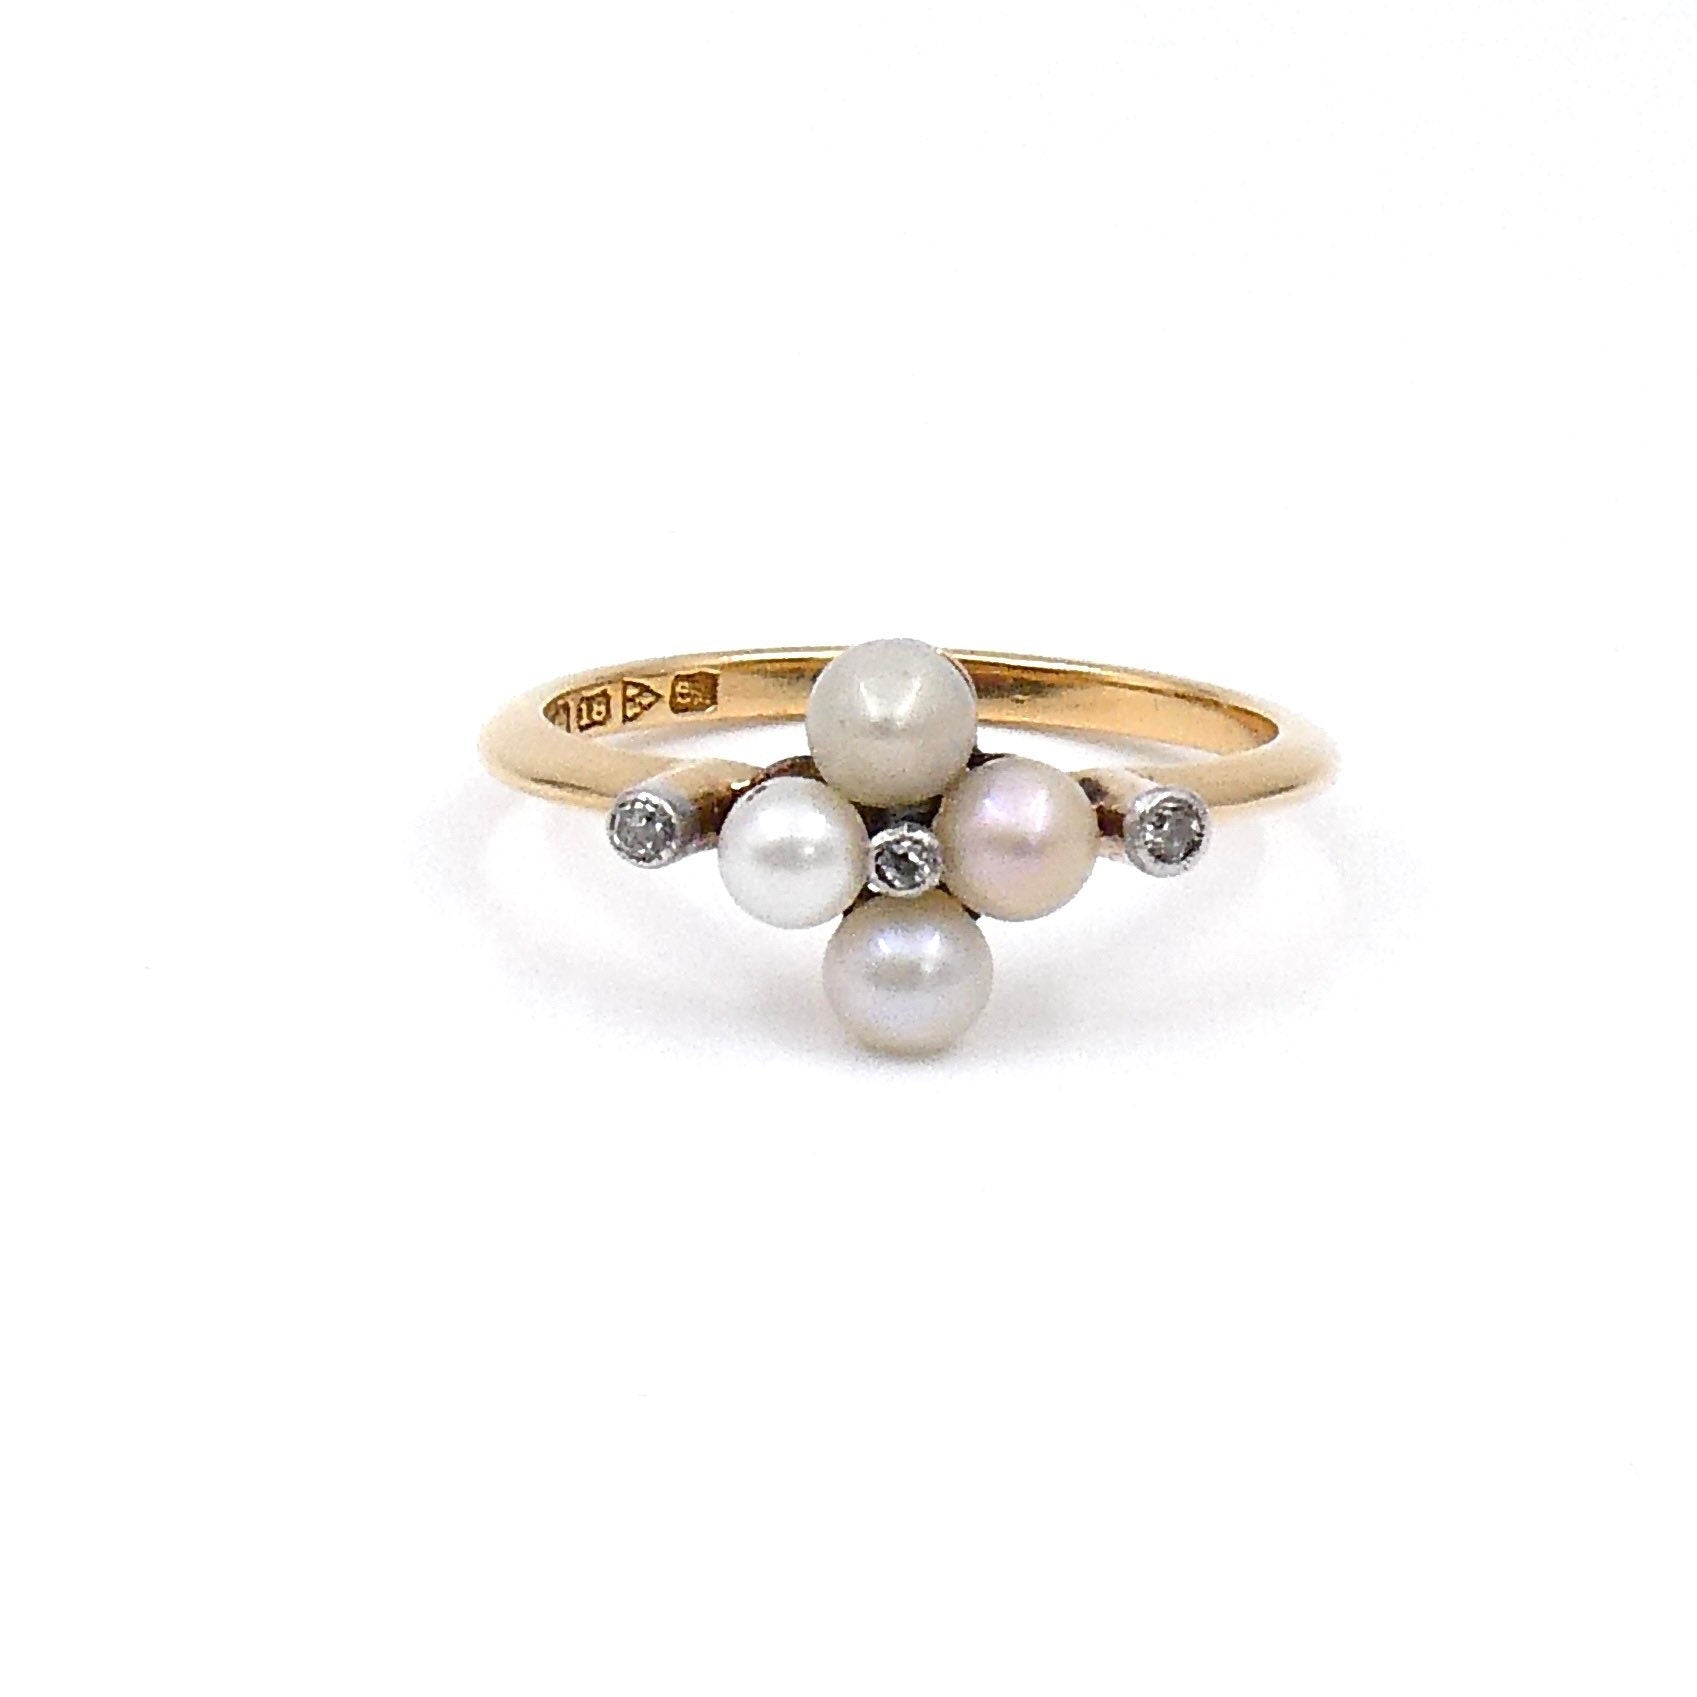 A pearl and white sapphire ring, antique pearl ring hallmarked 18kt gold Chester 1915-16. - Collected